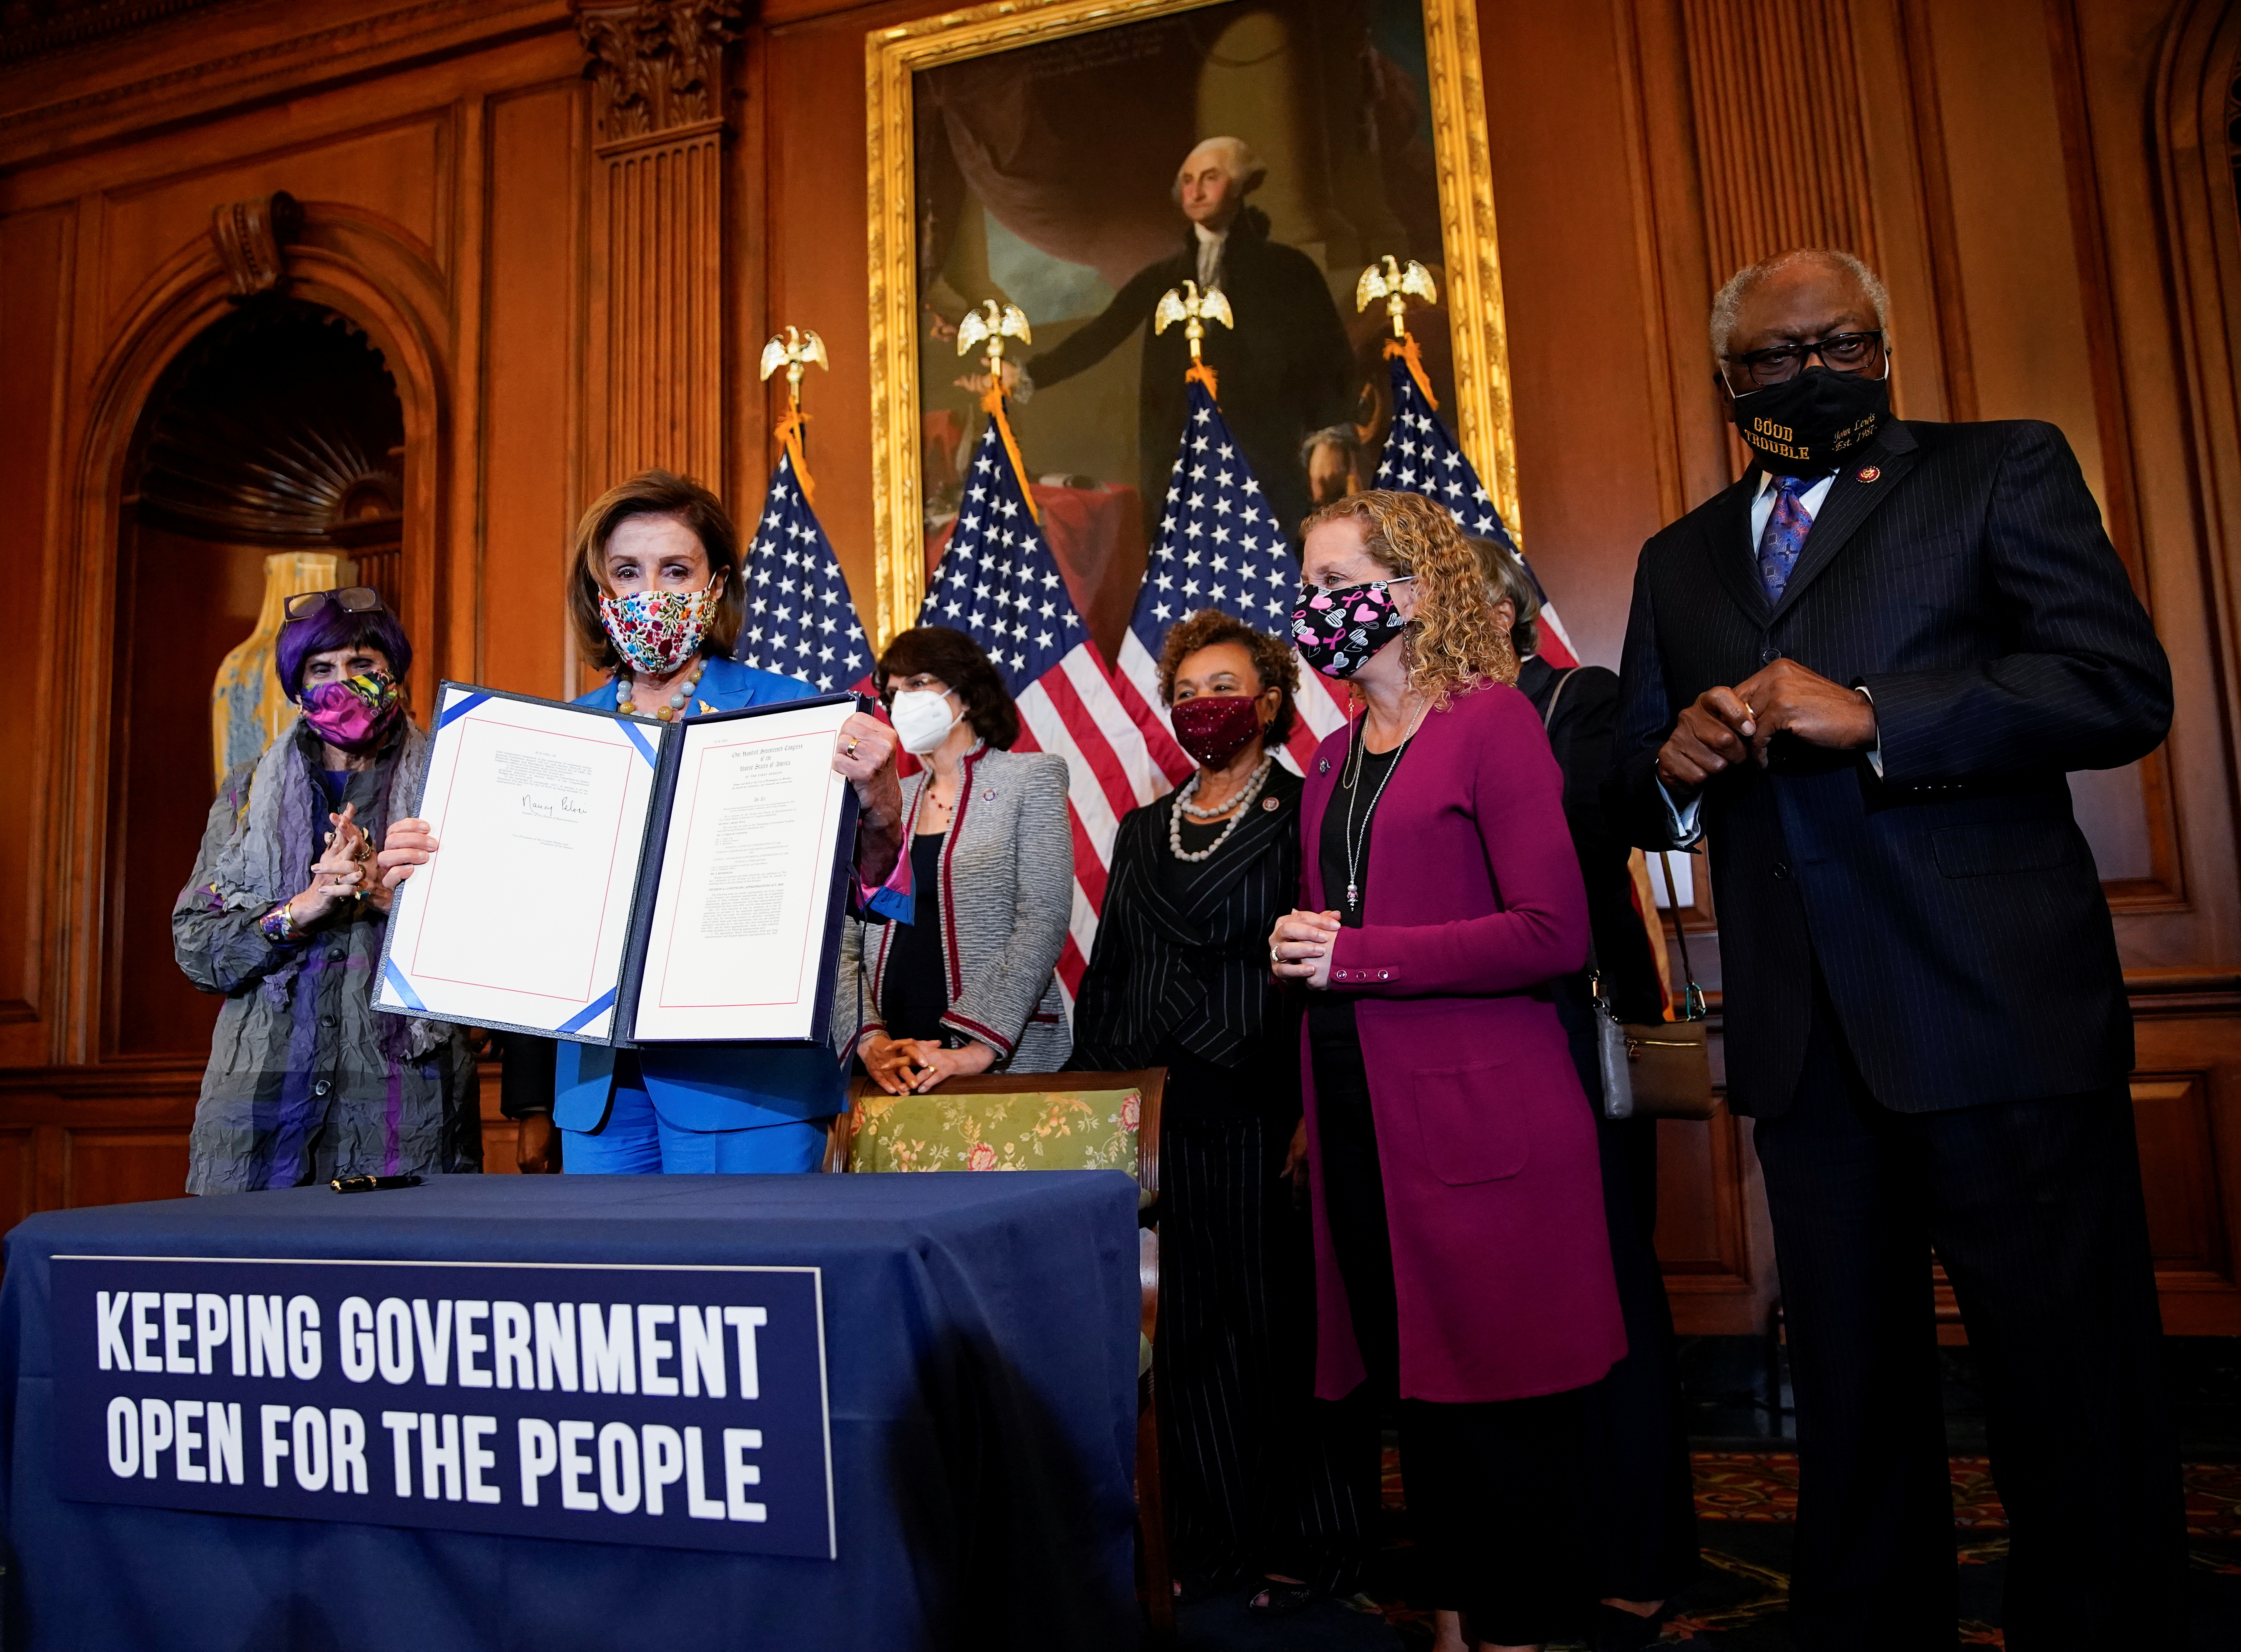 U.S. House Speaker Nancy Pelosi (D-CA) is flanked by members of the House Democratic Caucus as she holds the continuing resolution she signed to avoid a U.S. government shutdown during a bill enrollment ceremony on Capitol Hill in Washington, U.S., September 30, 2021. REUTERS/Elizabeth Frantz    